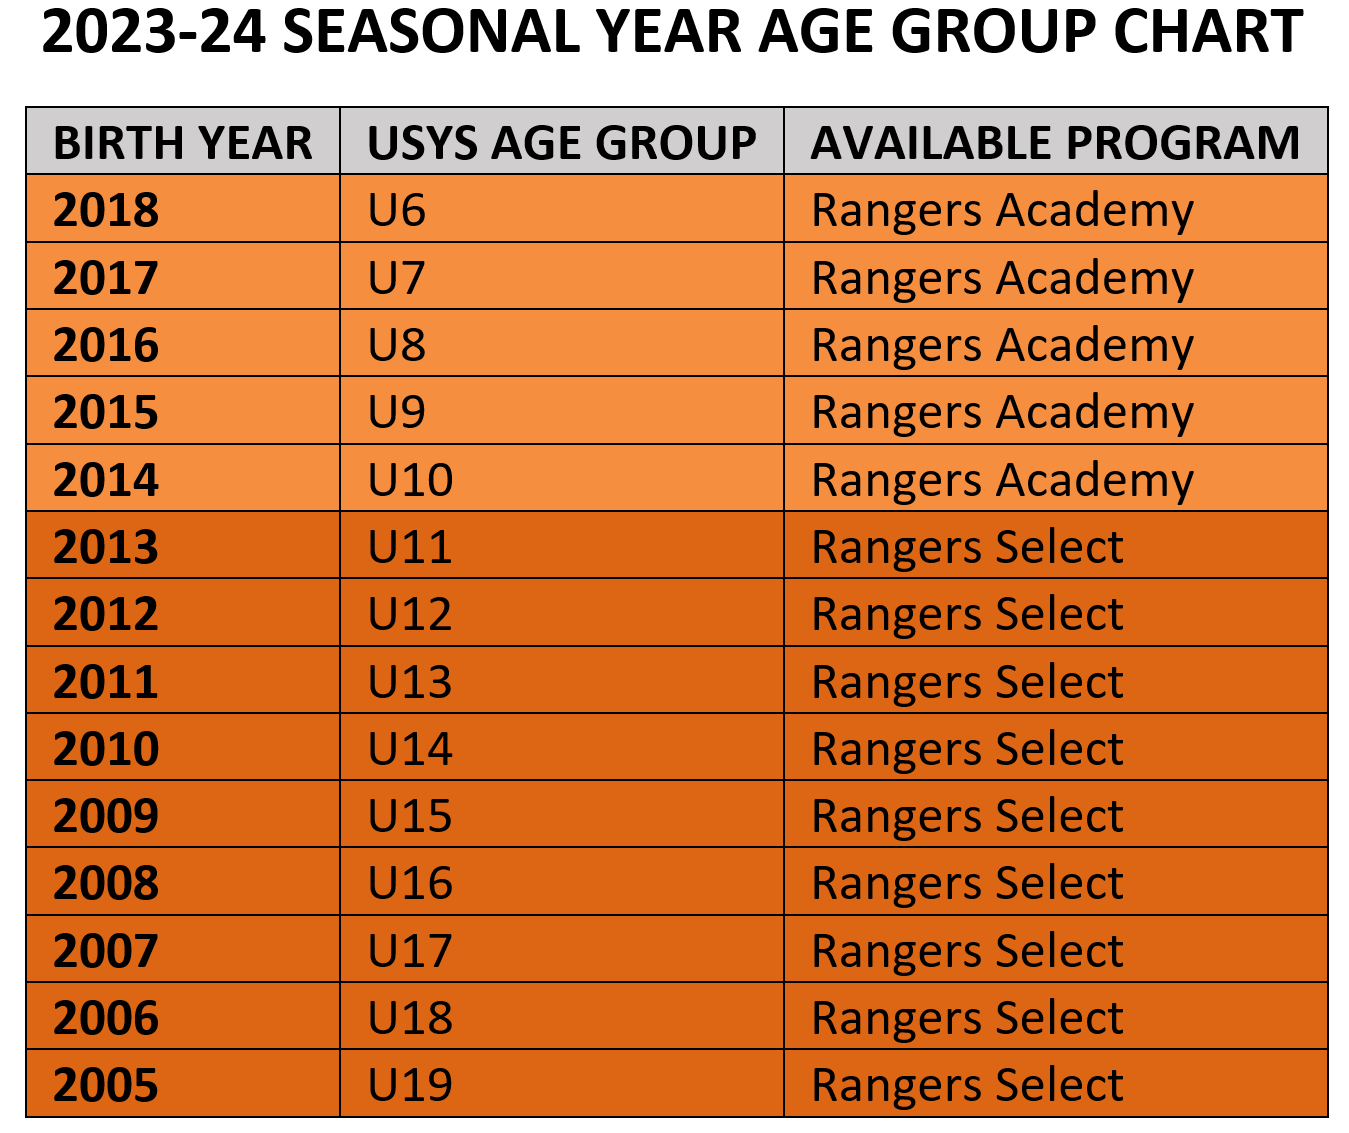 Age group chart 202324 (2)